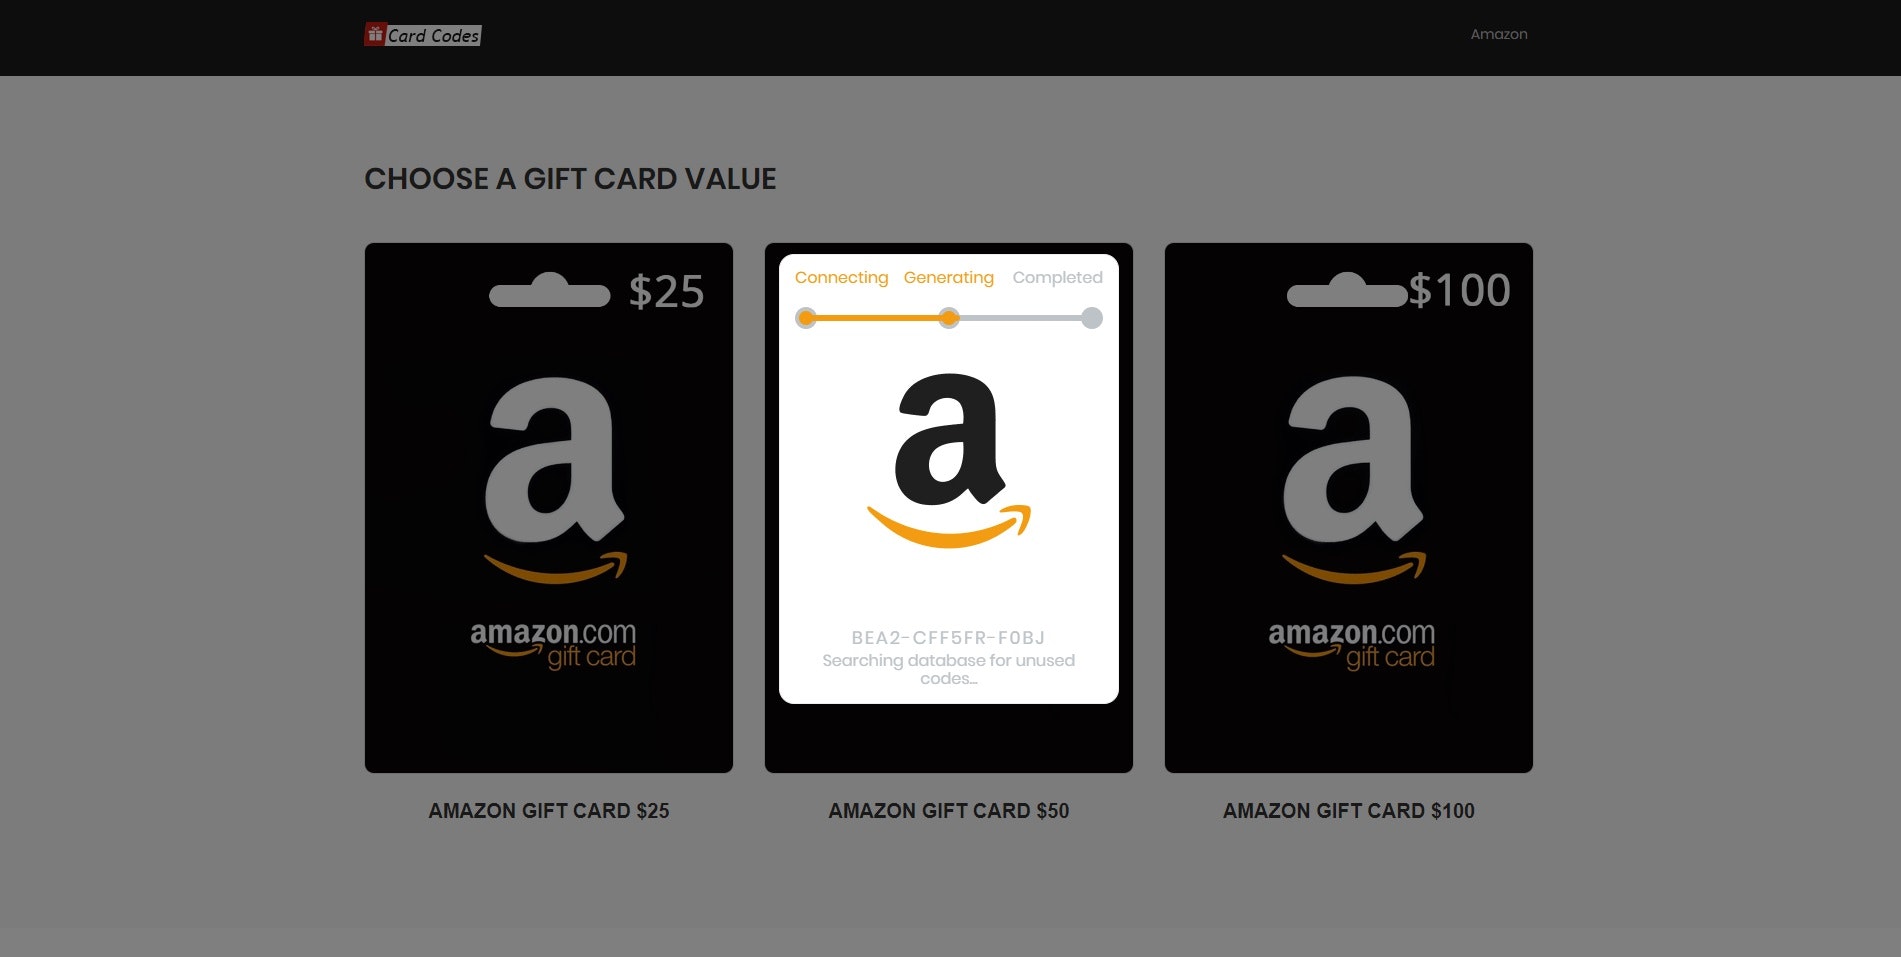 306: Amazon Gift Cards: How To Redeem | by Mike Murphy | Medium